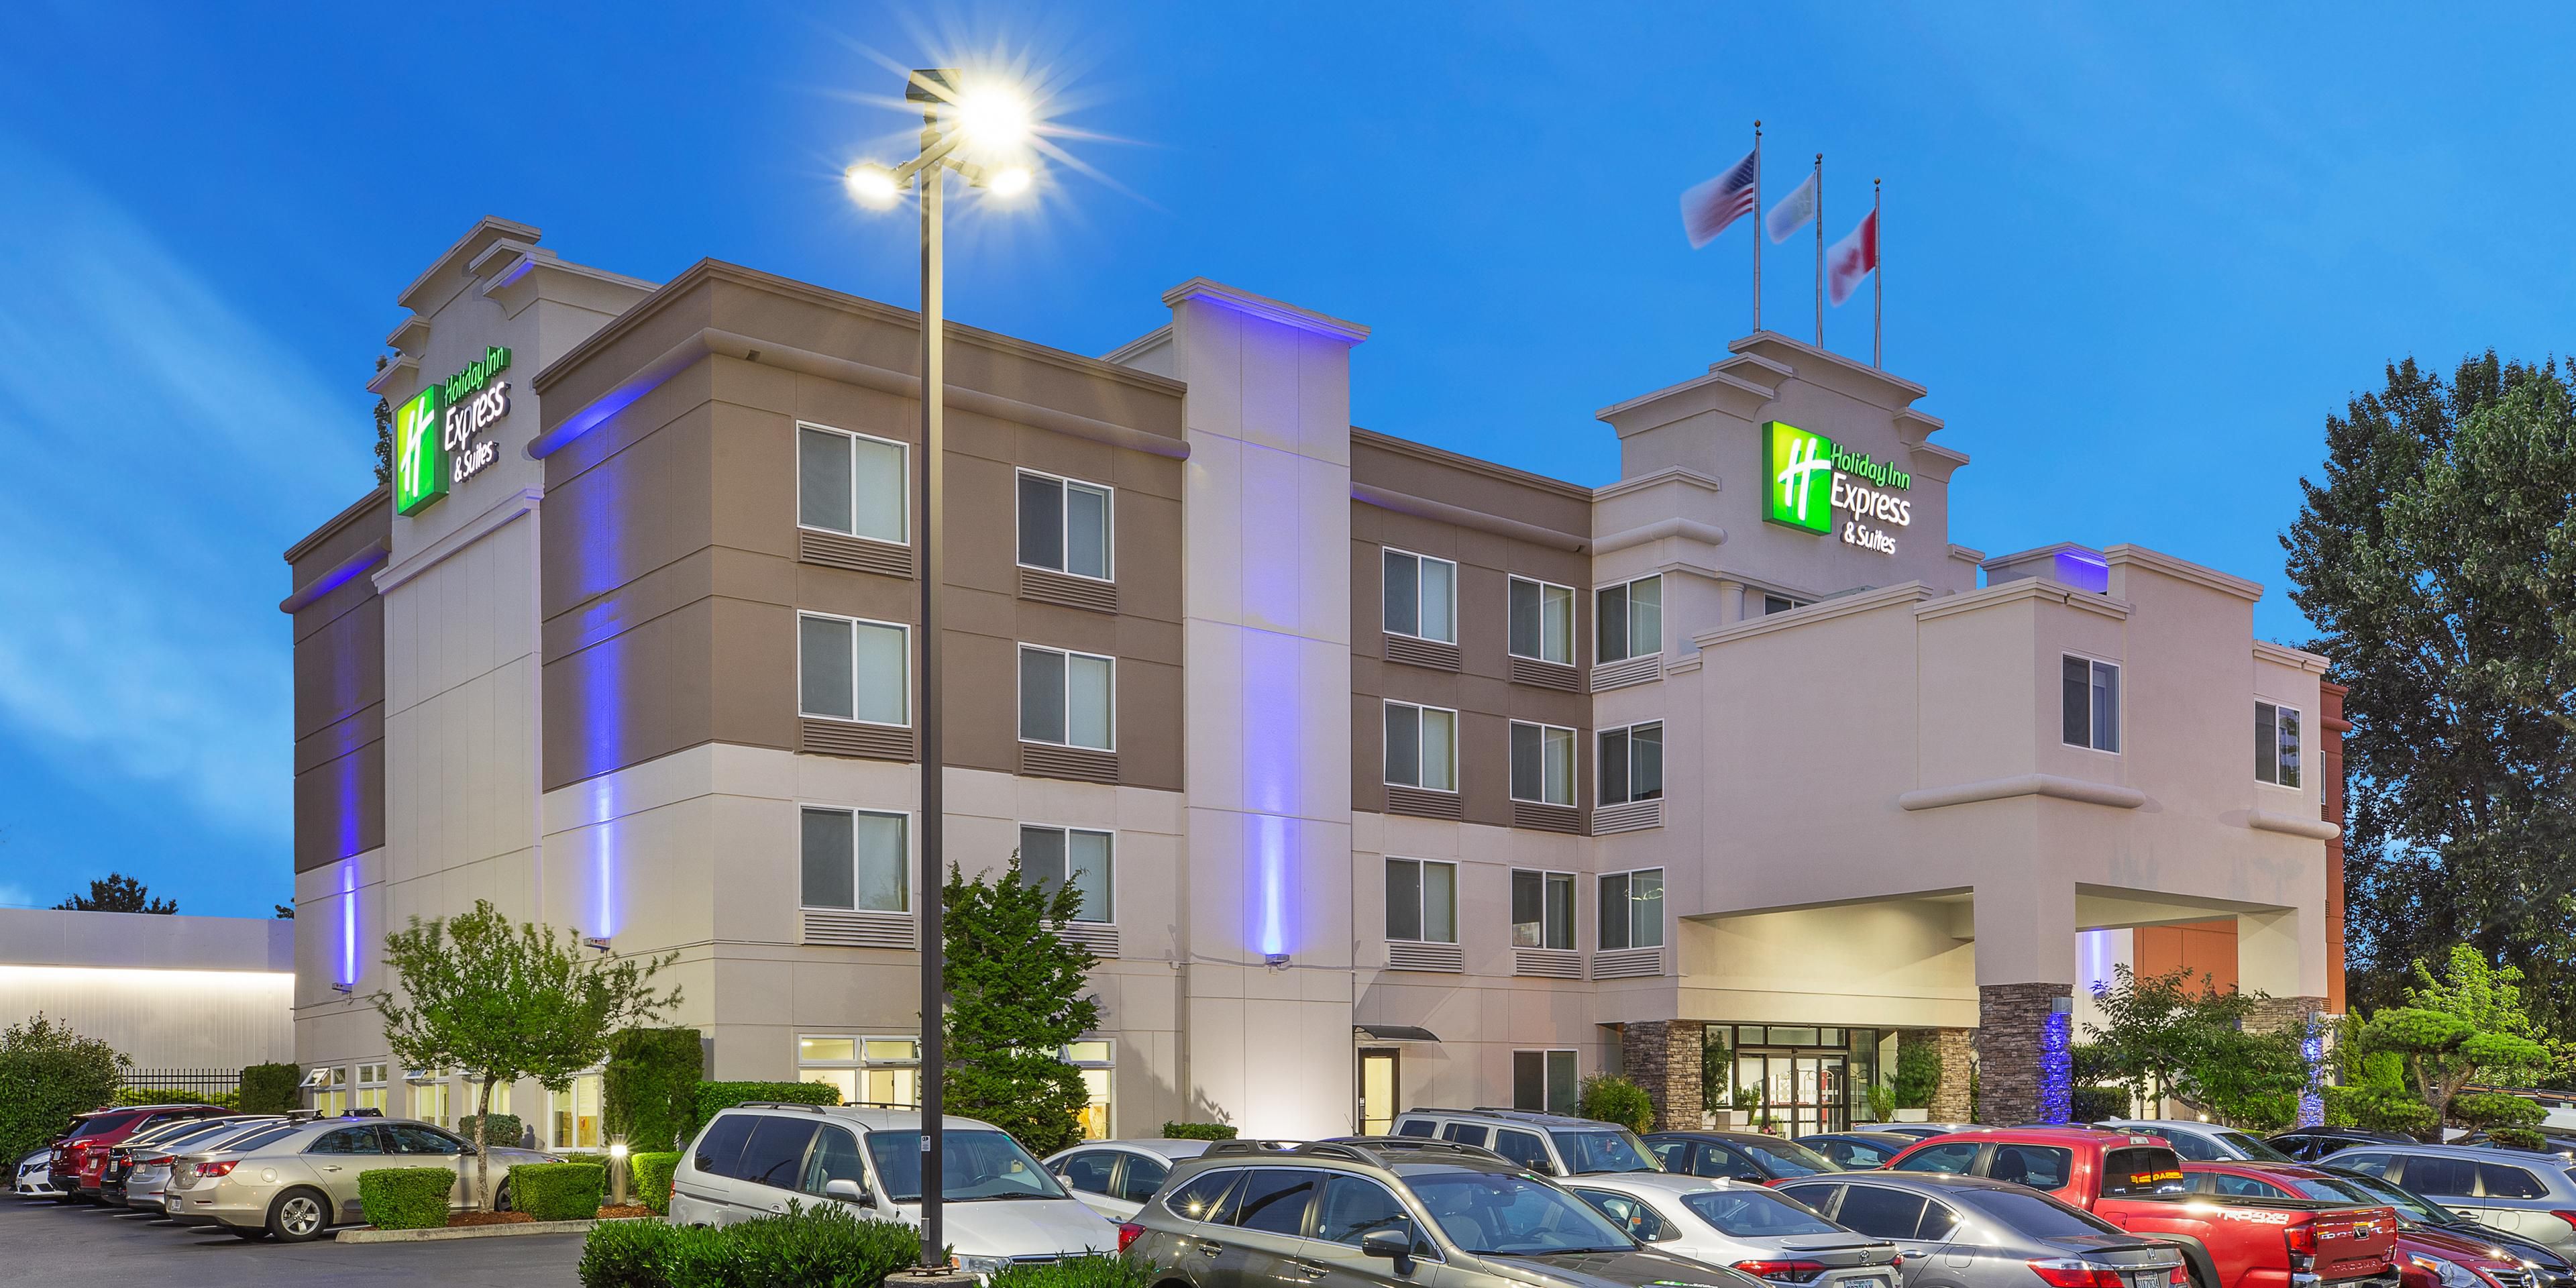 Our location off I-5 provides you easy access to the Fort Lewis and McChord Air Force Base, several hospitals including Tacoma General,  Port of Tacoma, Tacoma Convention Center, The Tacoma Dome and a variety of other attractions.